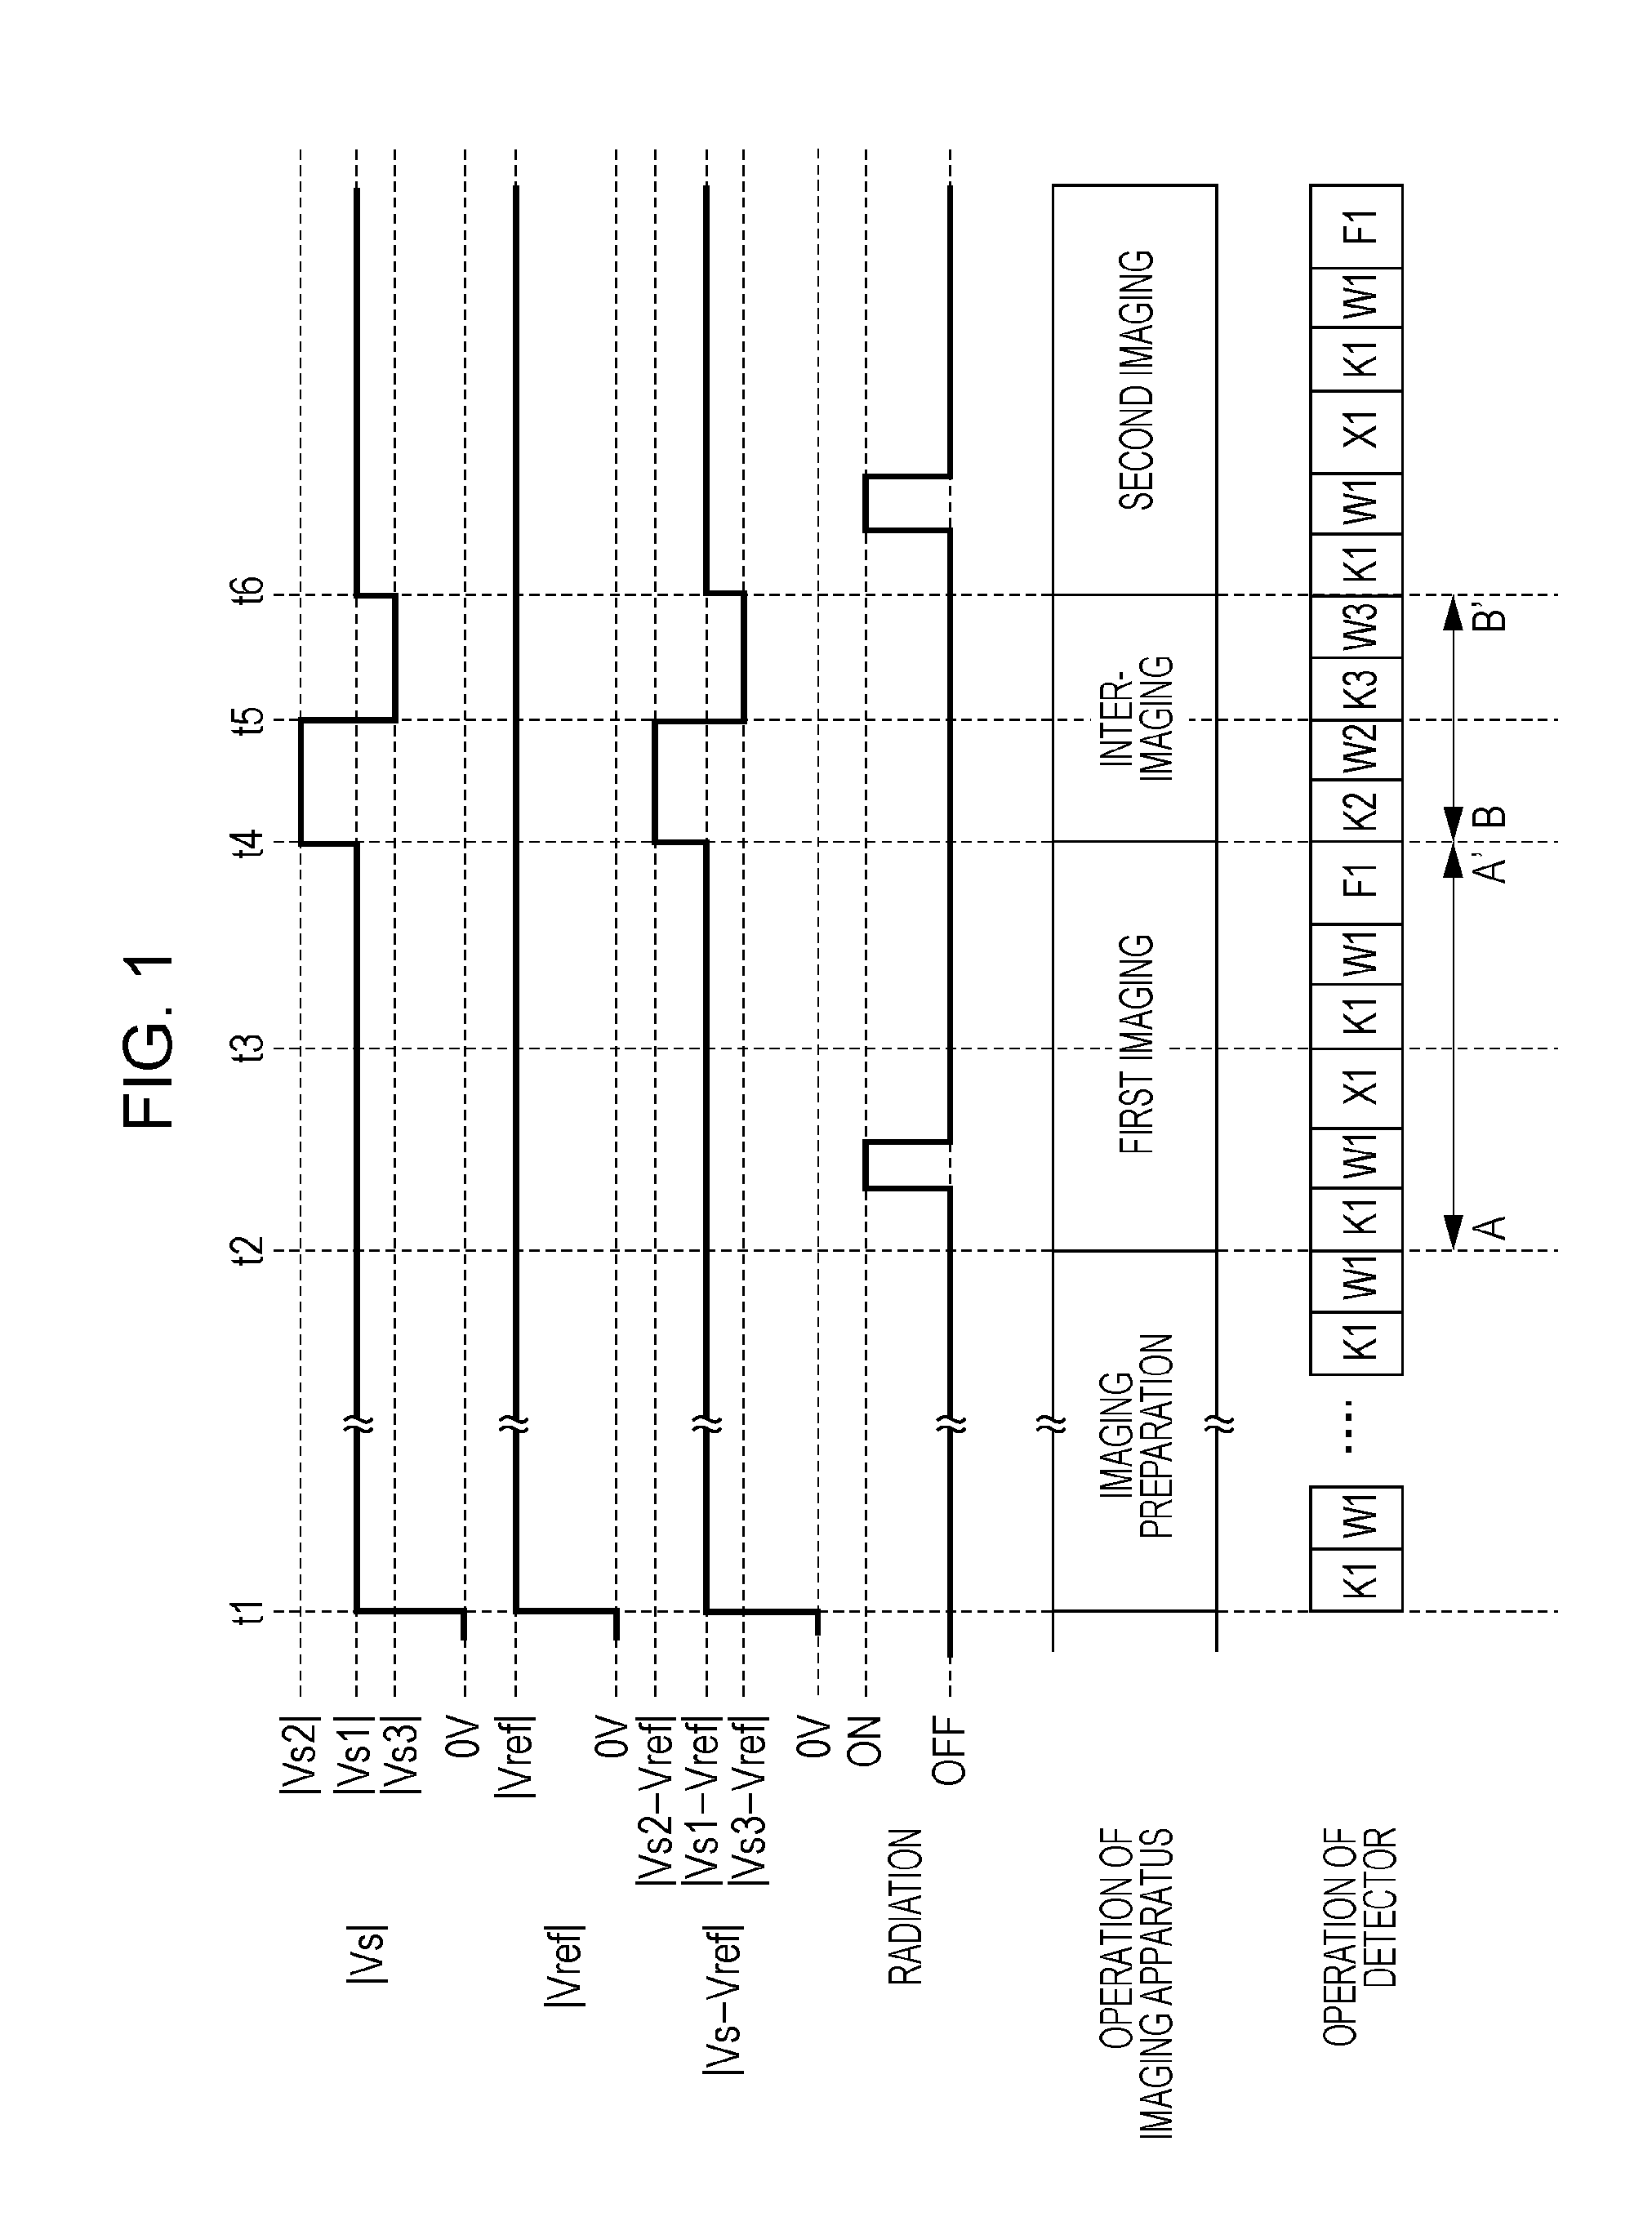 Imaging apparatus, imaging system, and method for controlling imaging apparatus